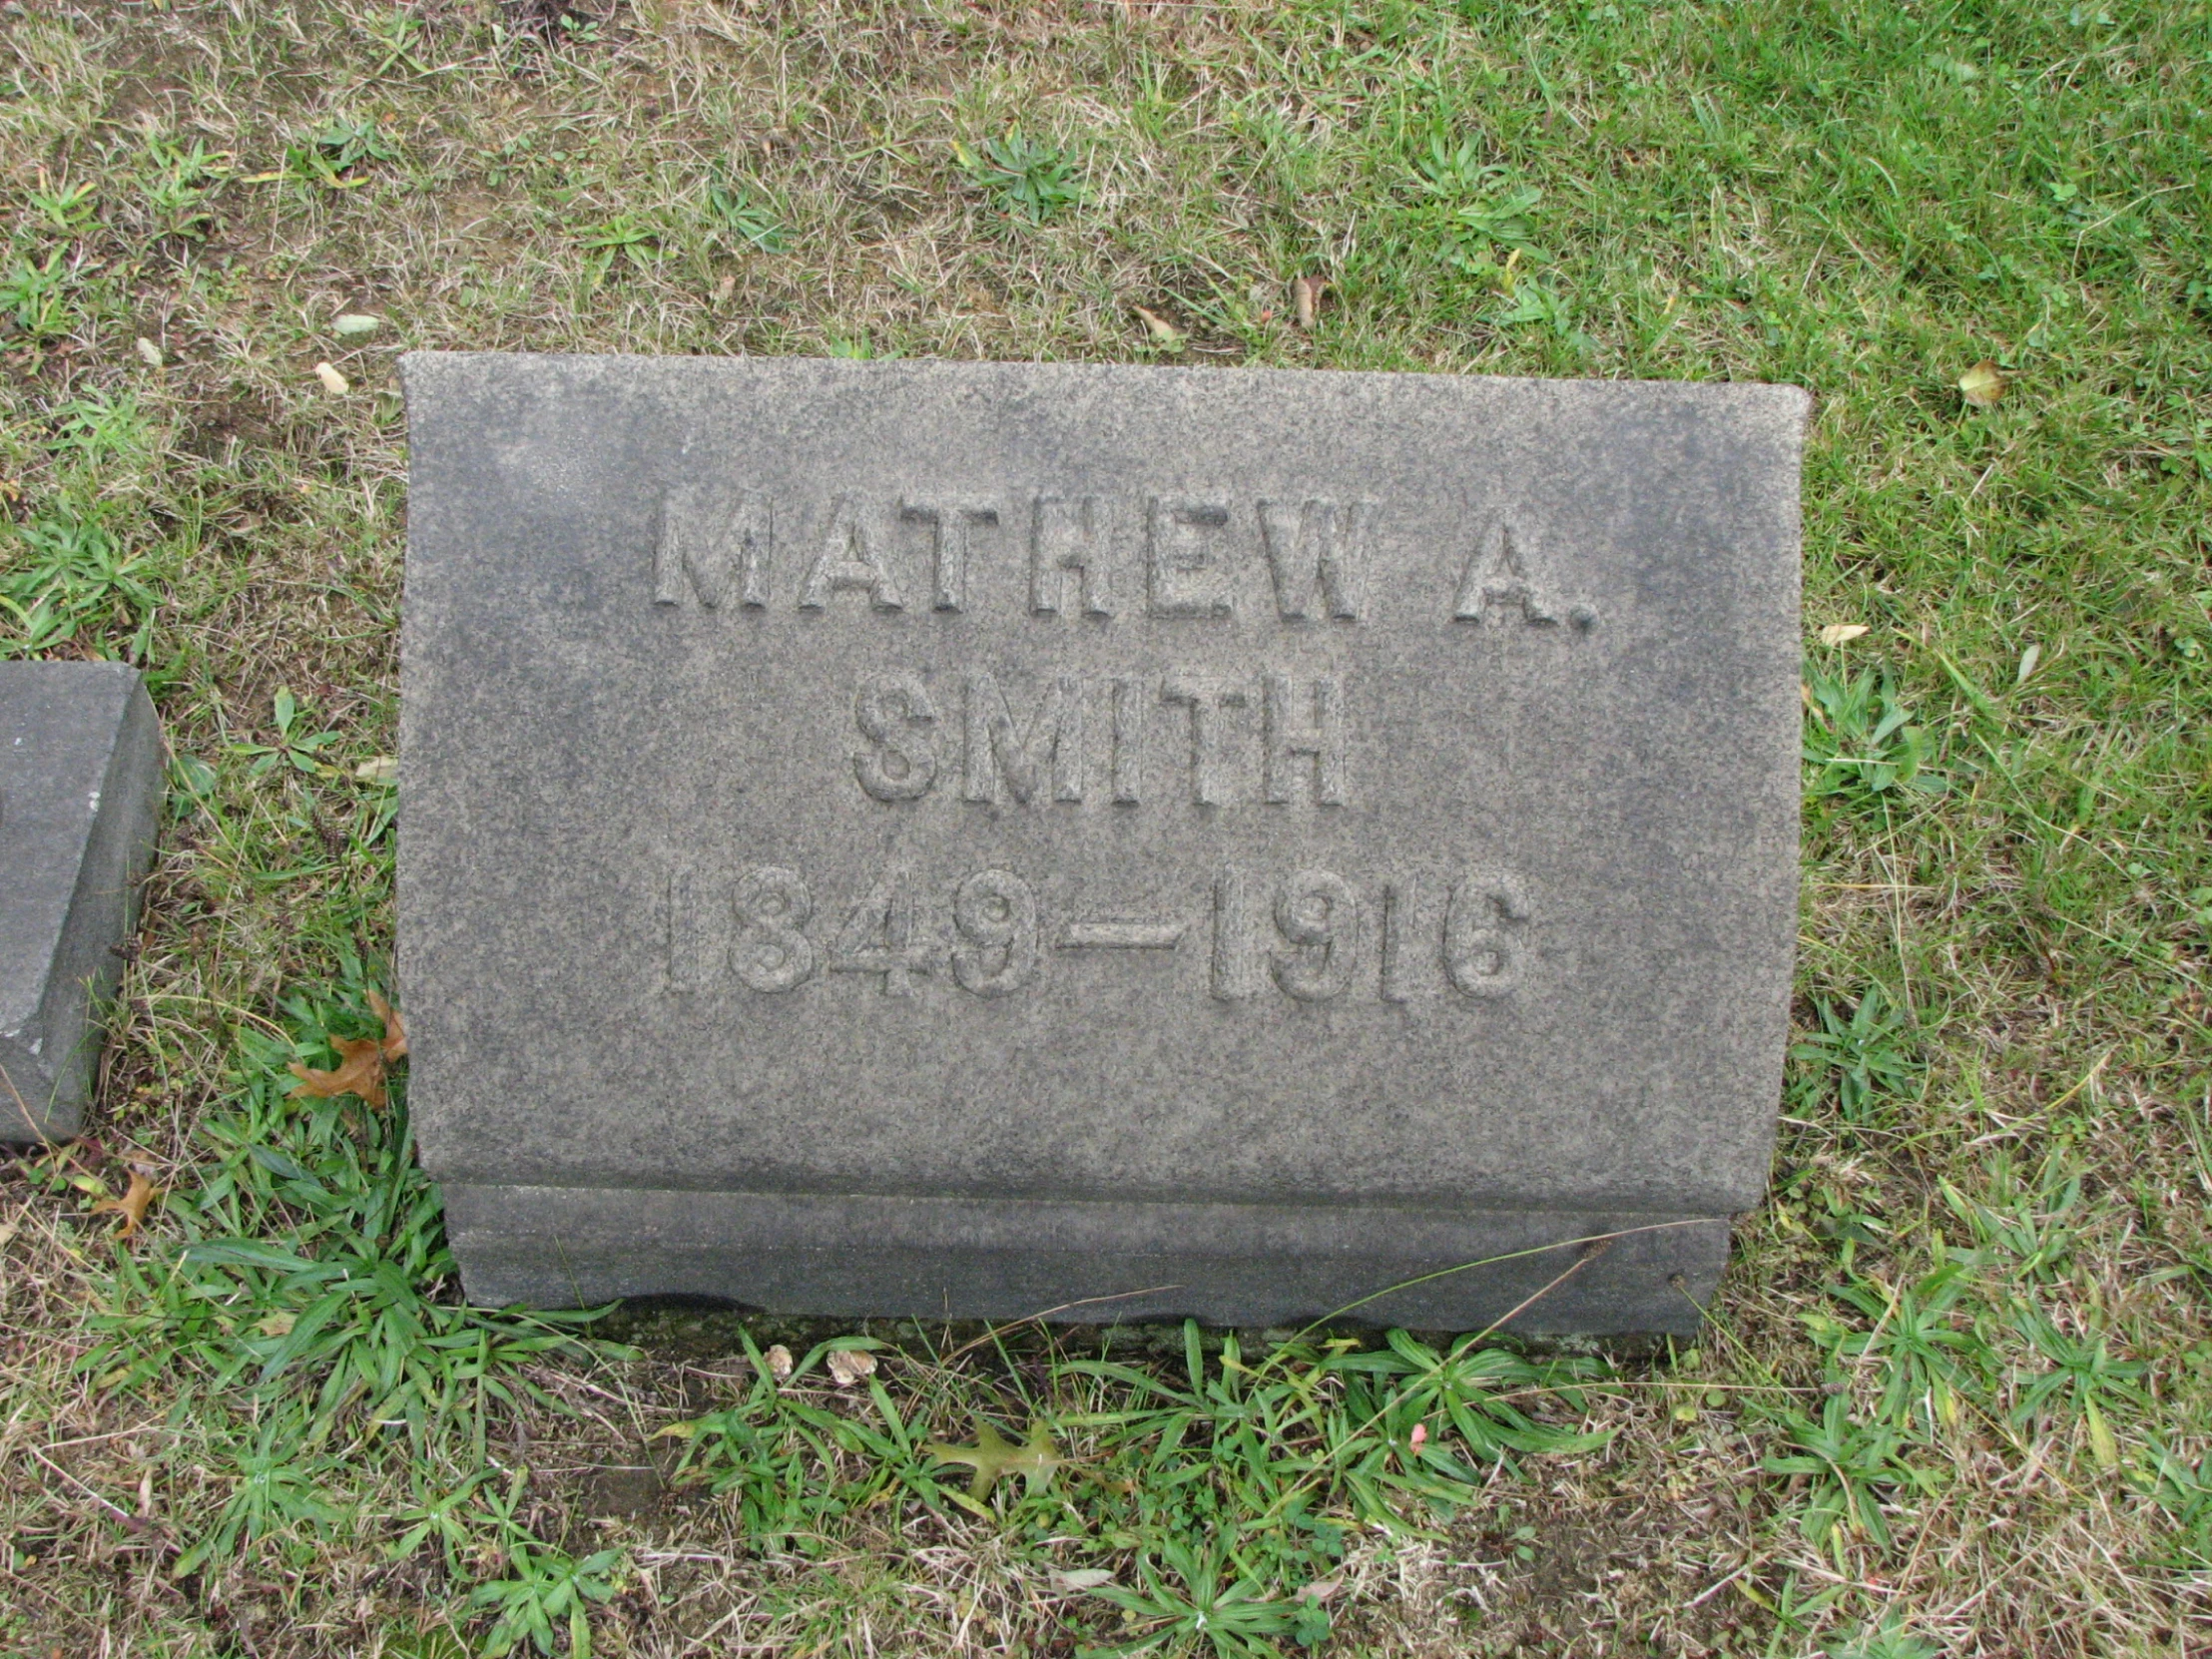 a headstone is on the grass with two cement blocks